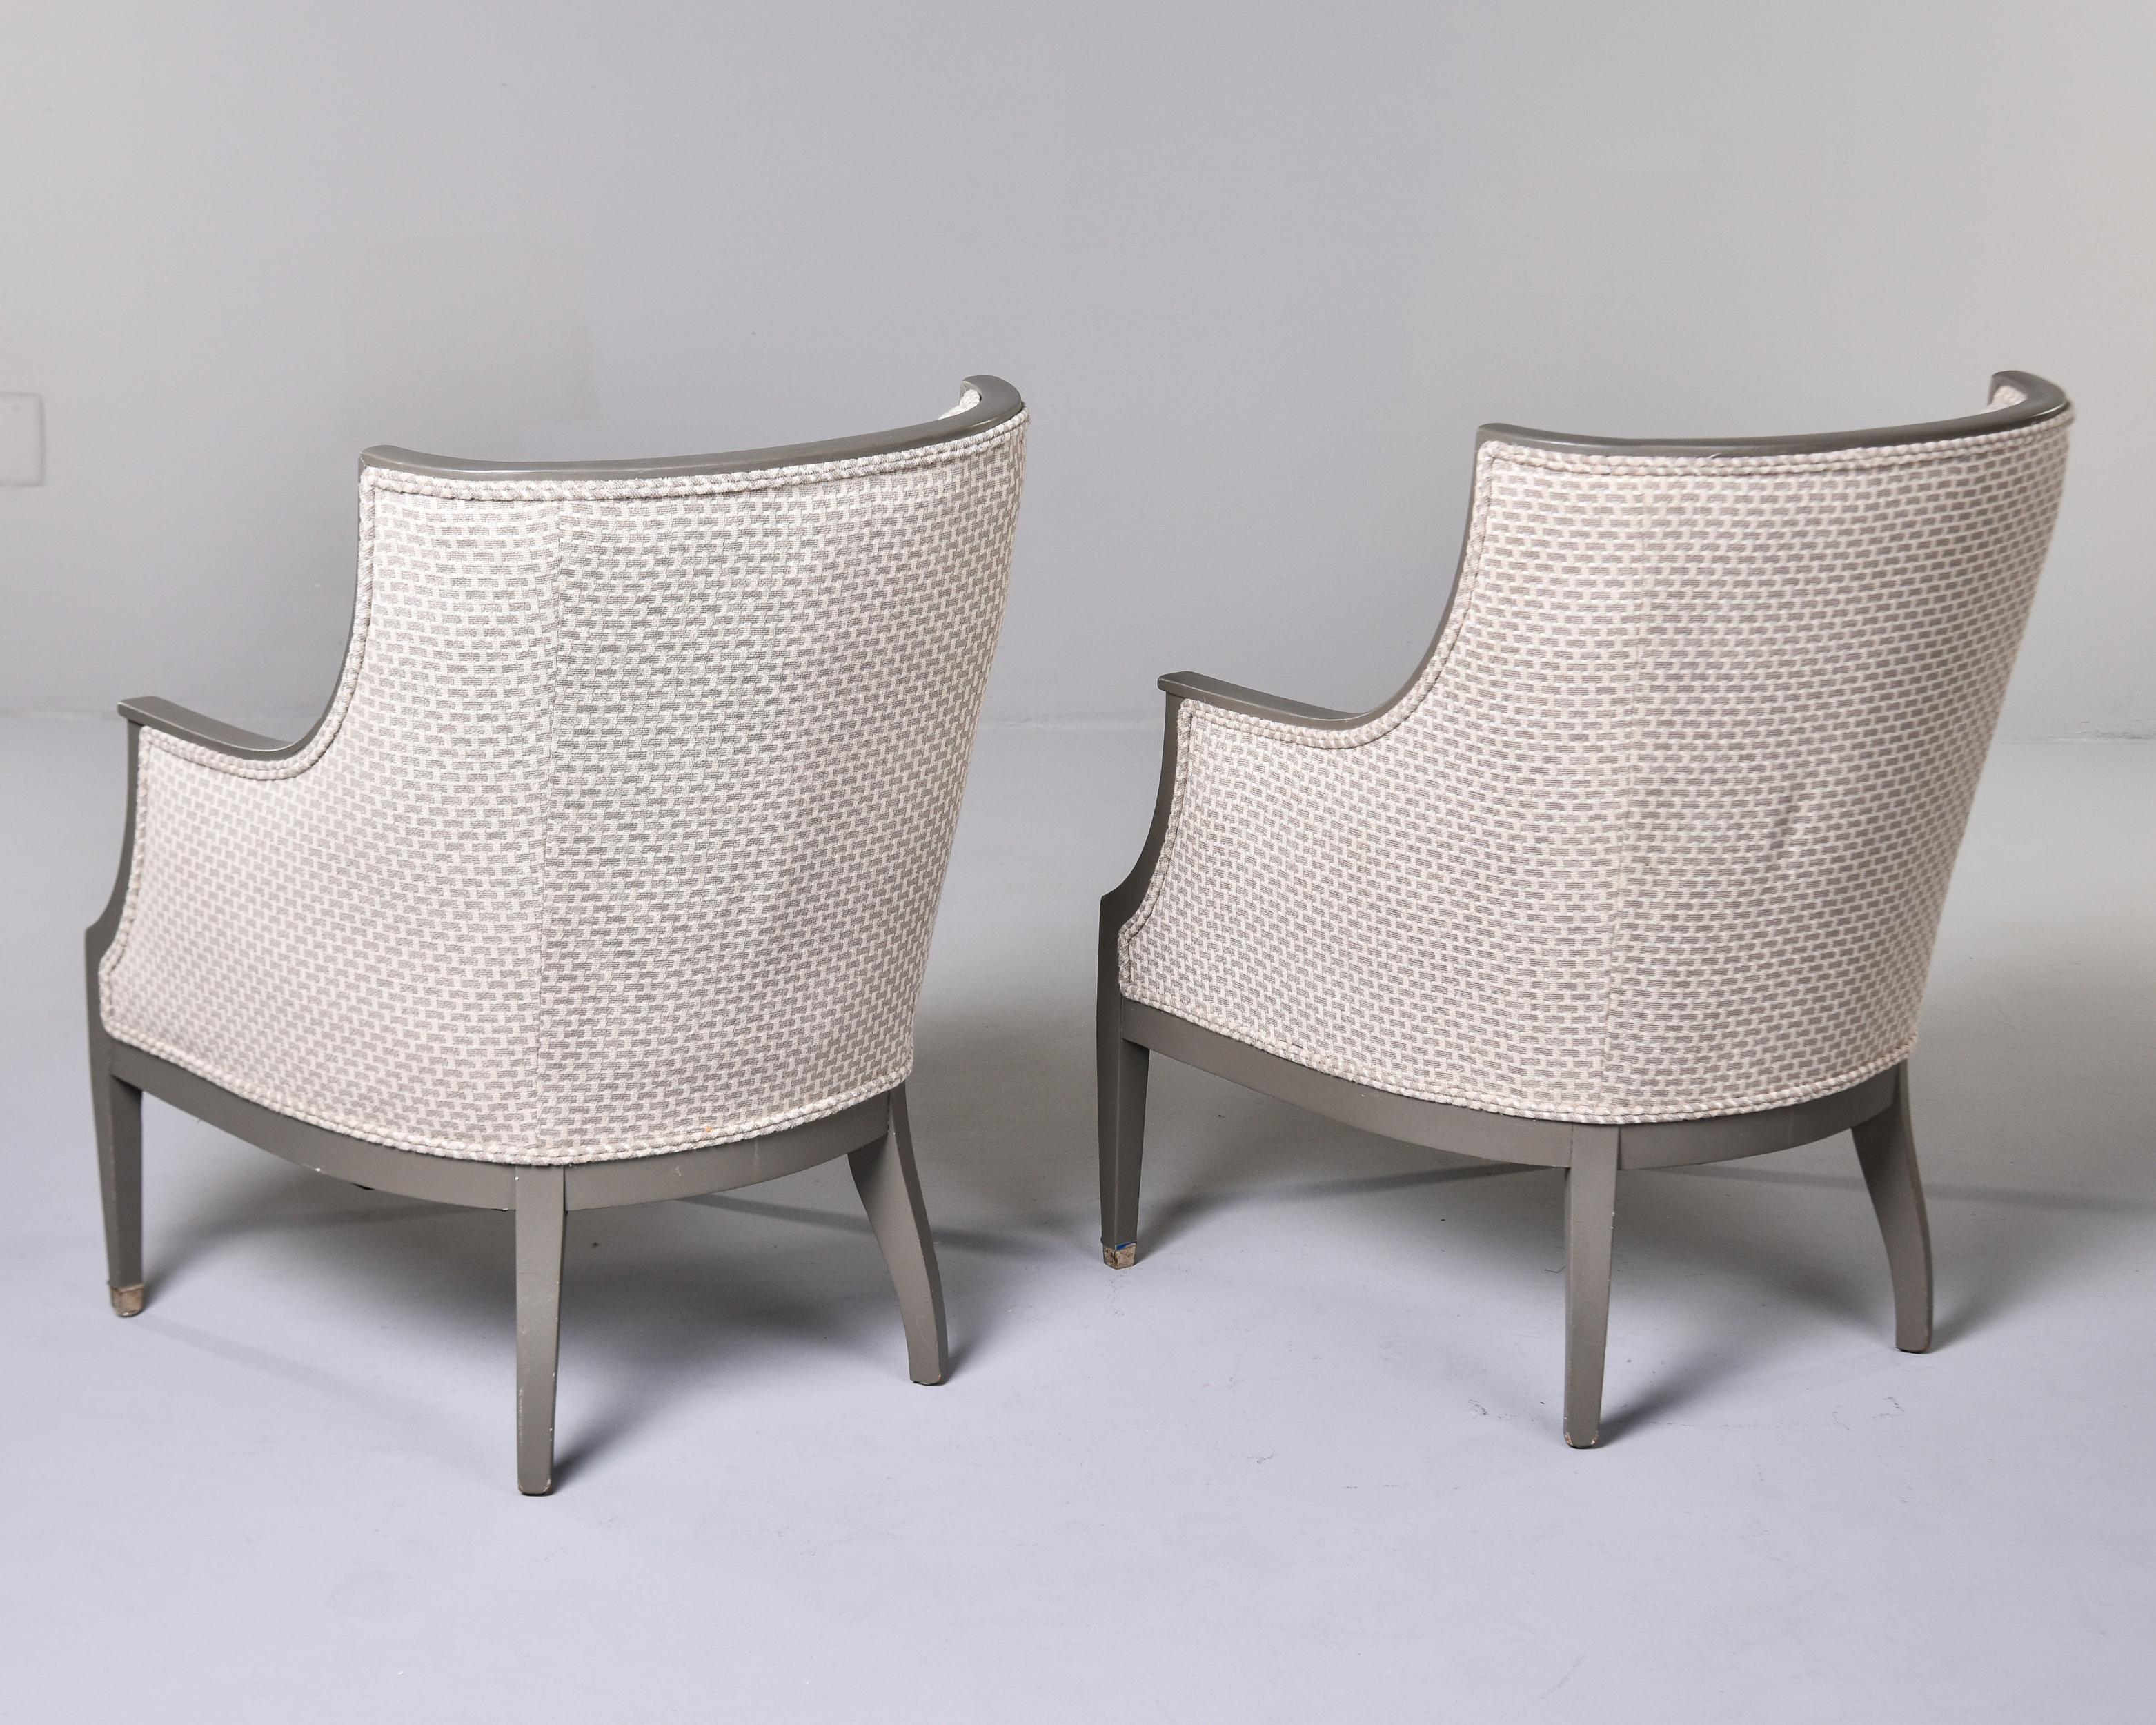 20th Century Pair Early 20th C Swedish Chairs With Painted Frames and New Upholstery For Sale